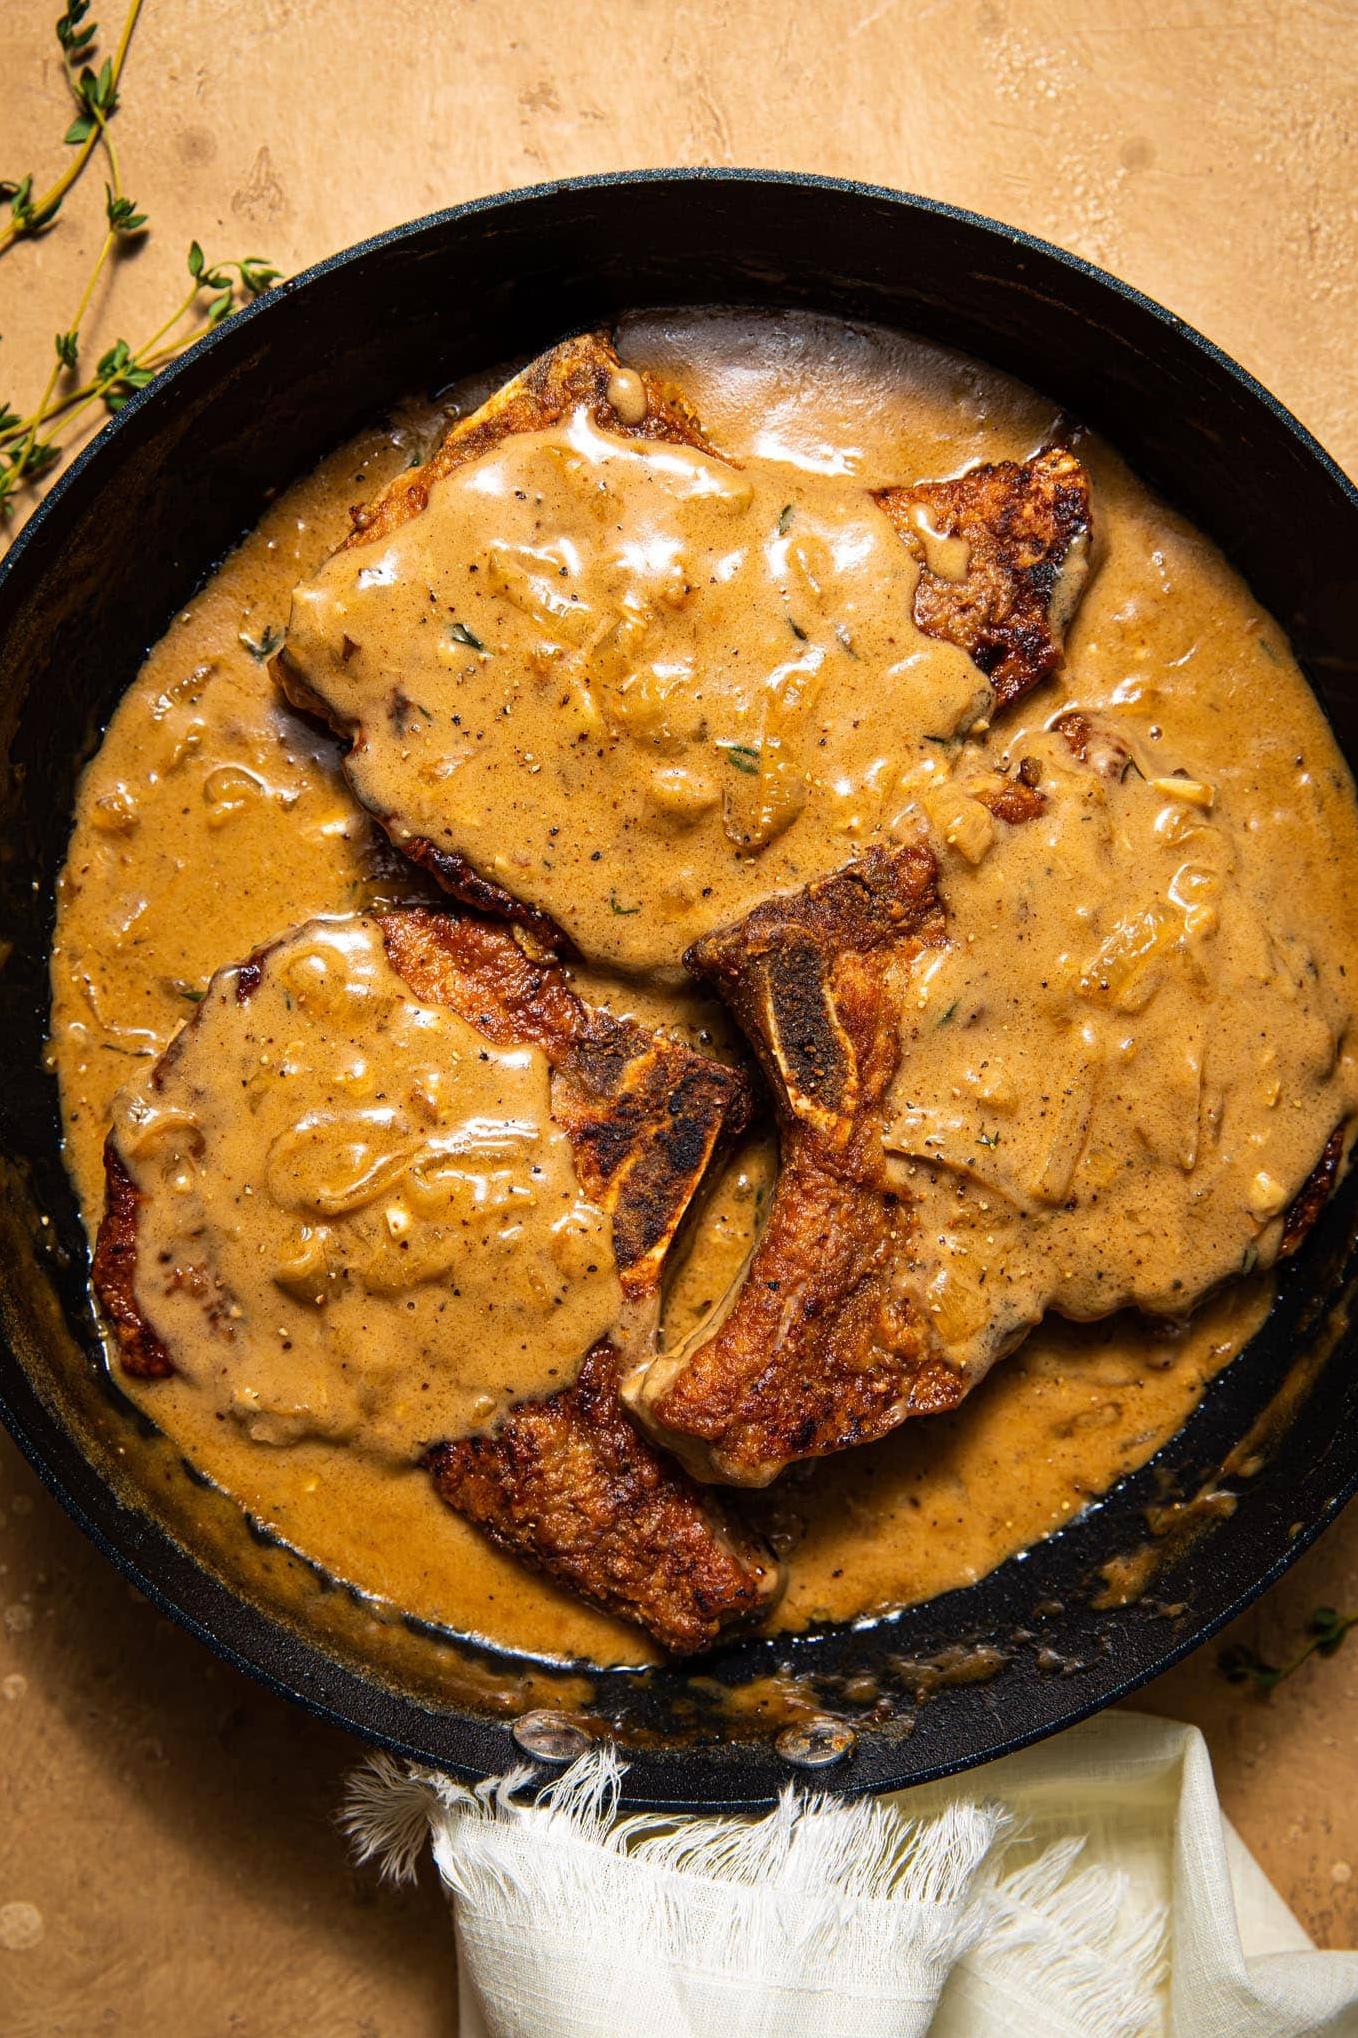  These pork chops are smothered in Southern-style gravy and seasoned to perfection.